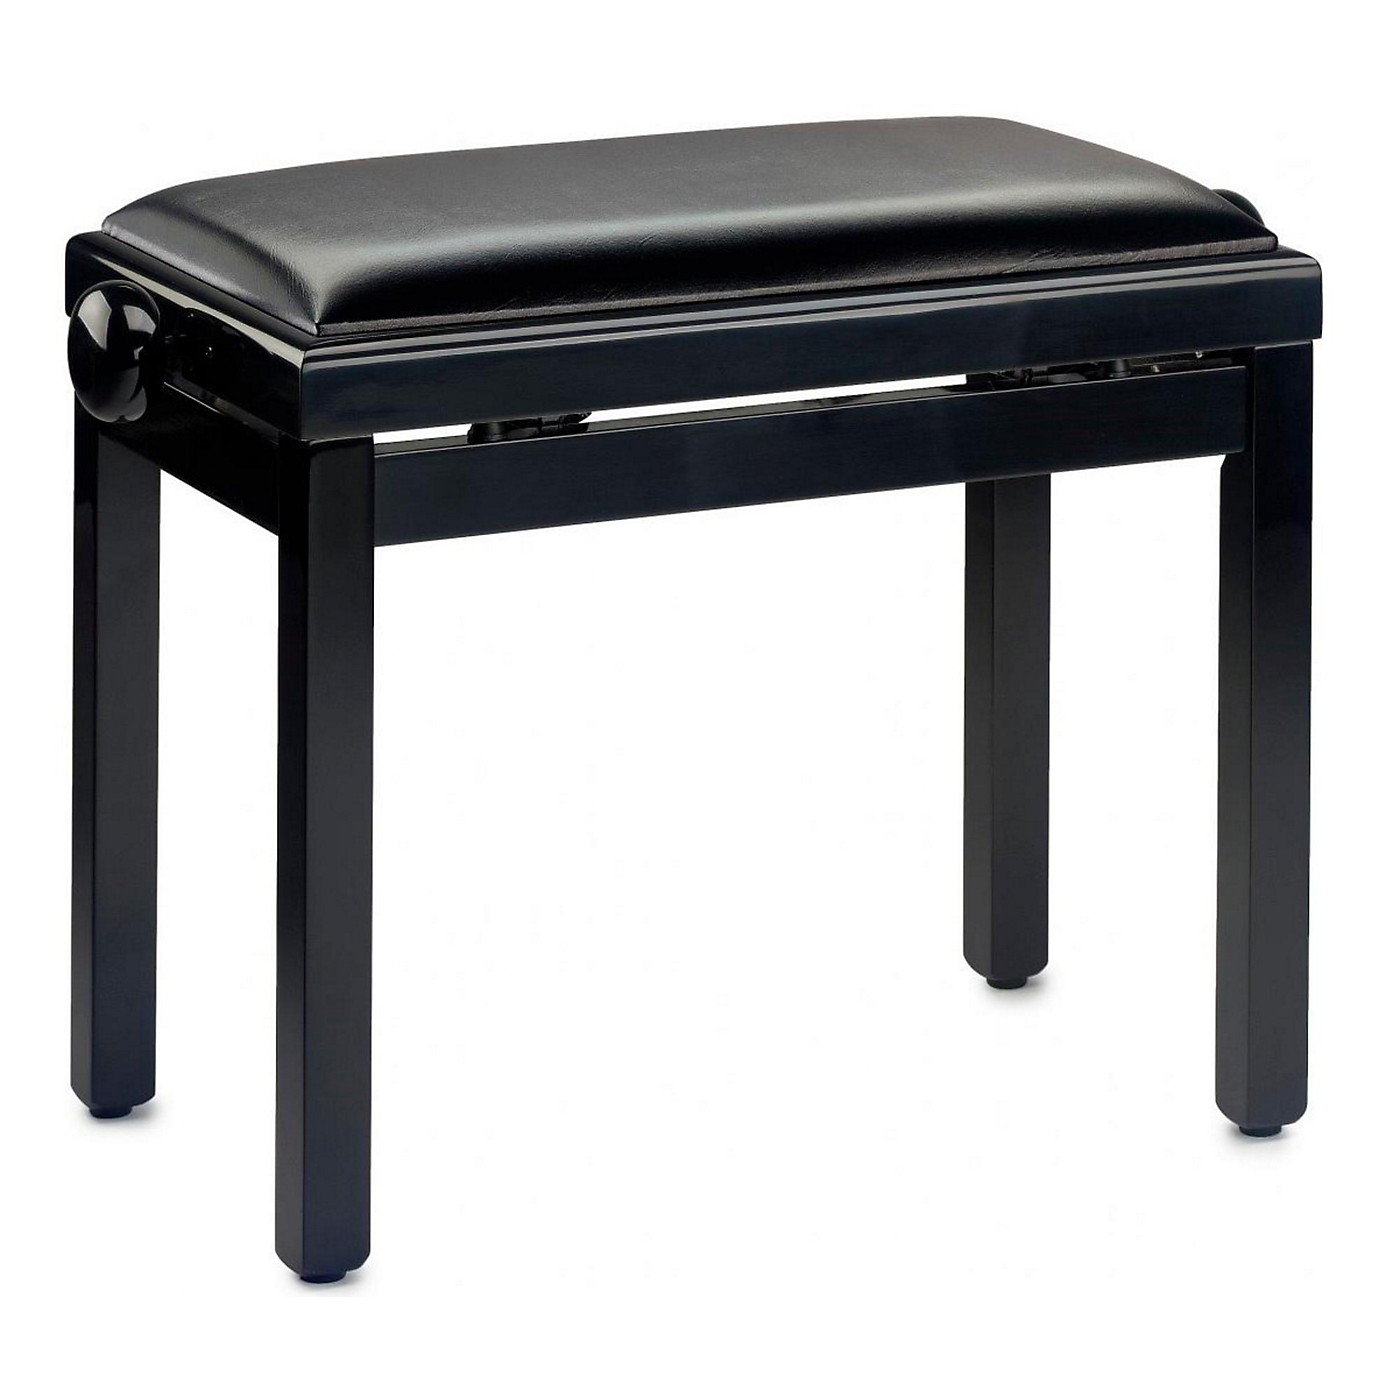 Musician's Gear PB39 Adjustable-Height Piano Bench thumbnail